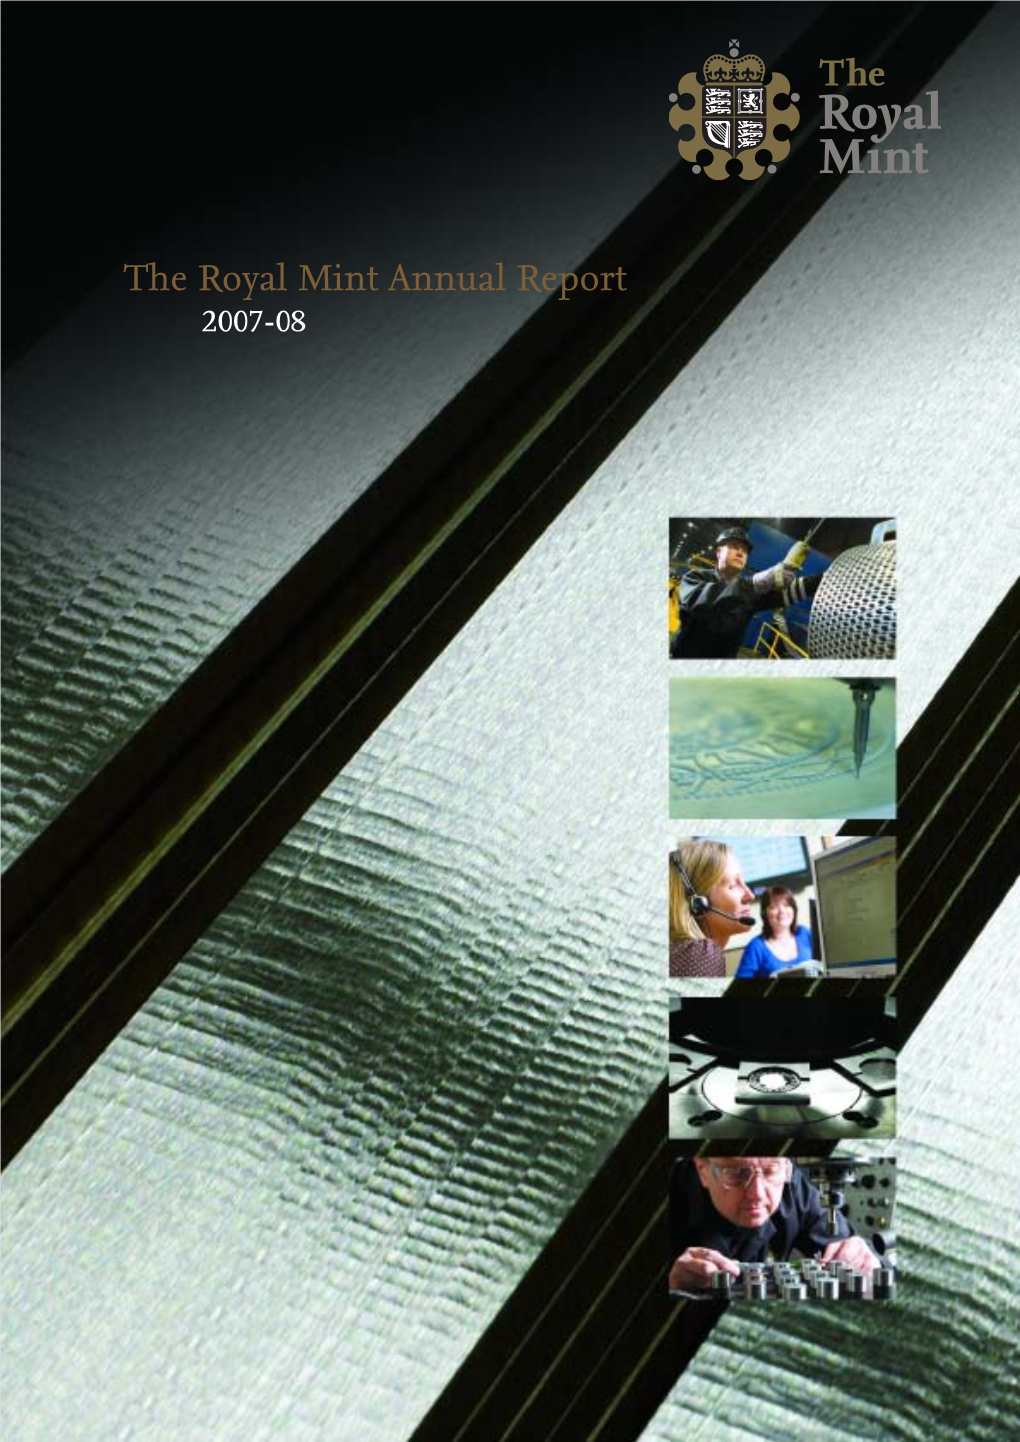 Annual Report 2007-08 Download